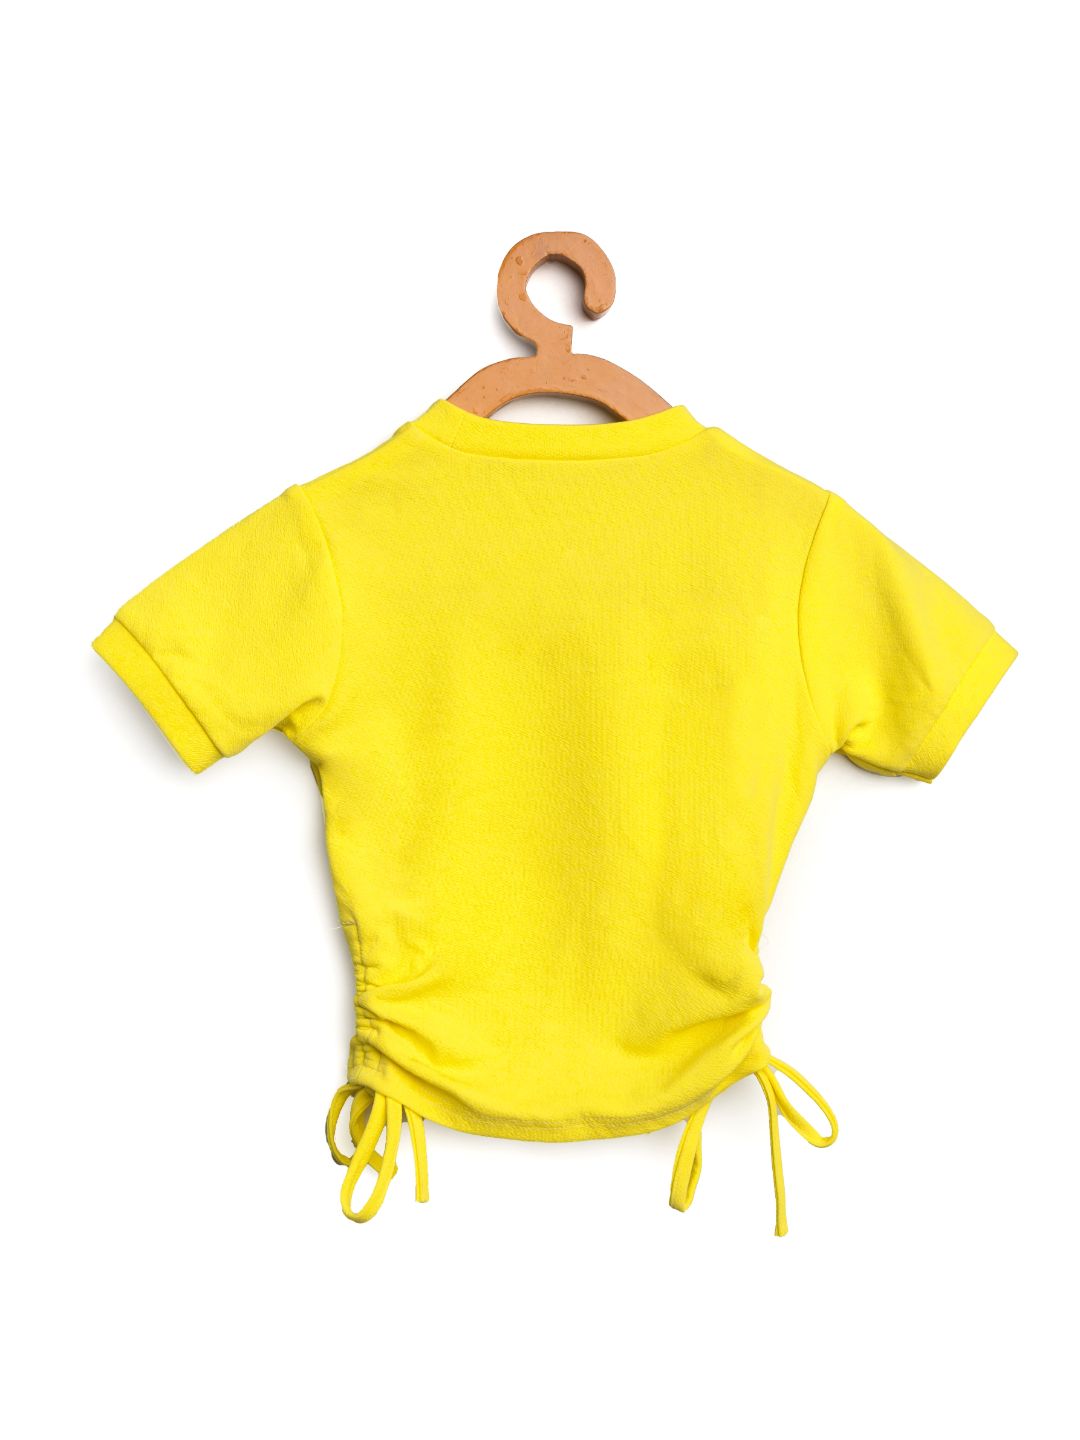 Cotton Stretchable Side Drawstring Top For Girls - Uptownie